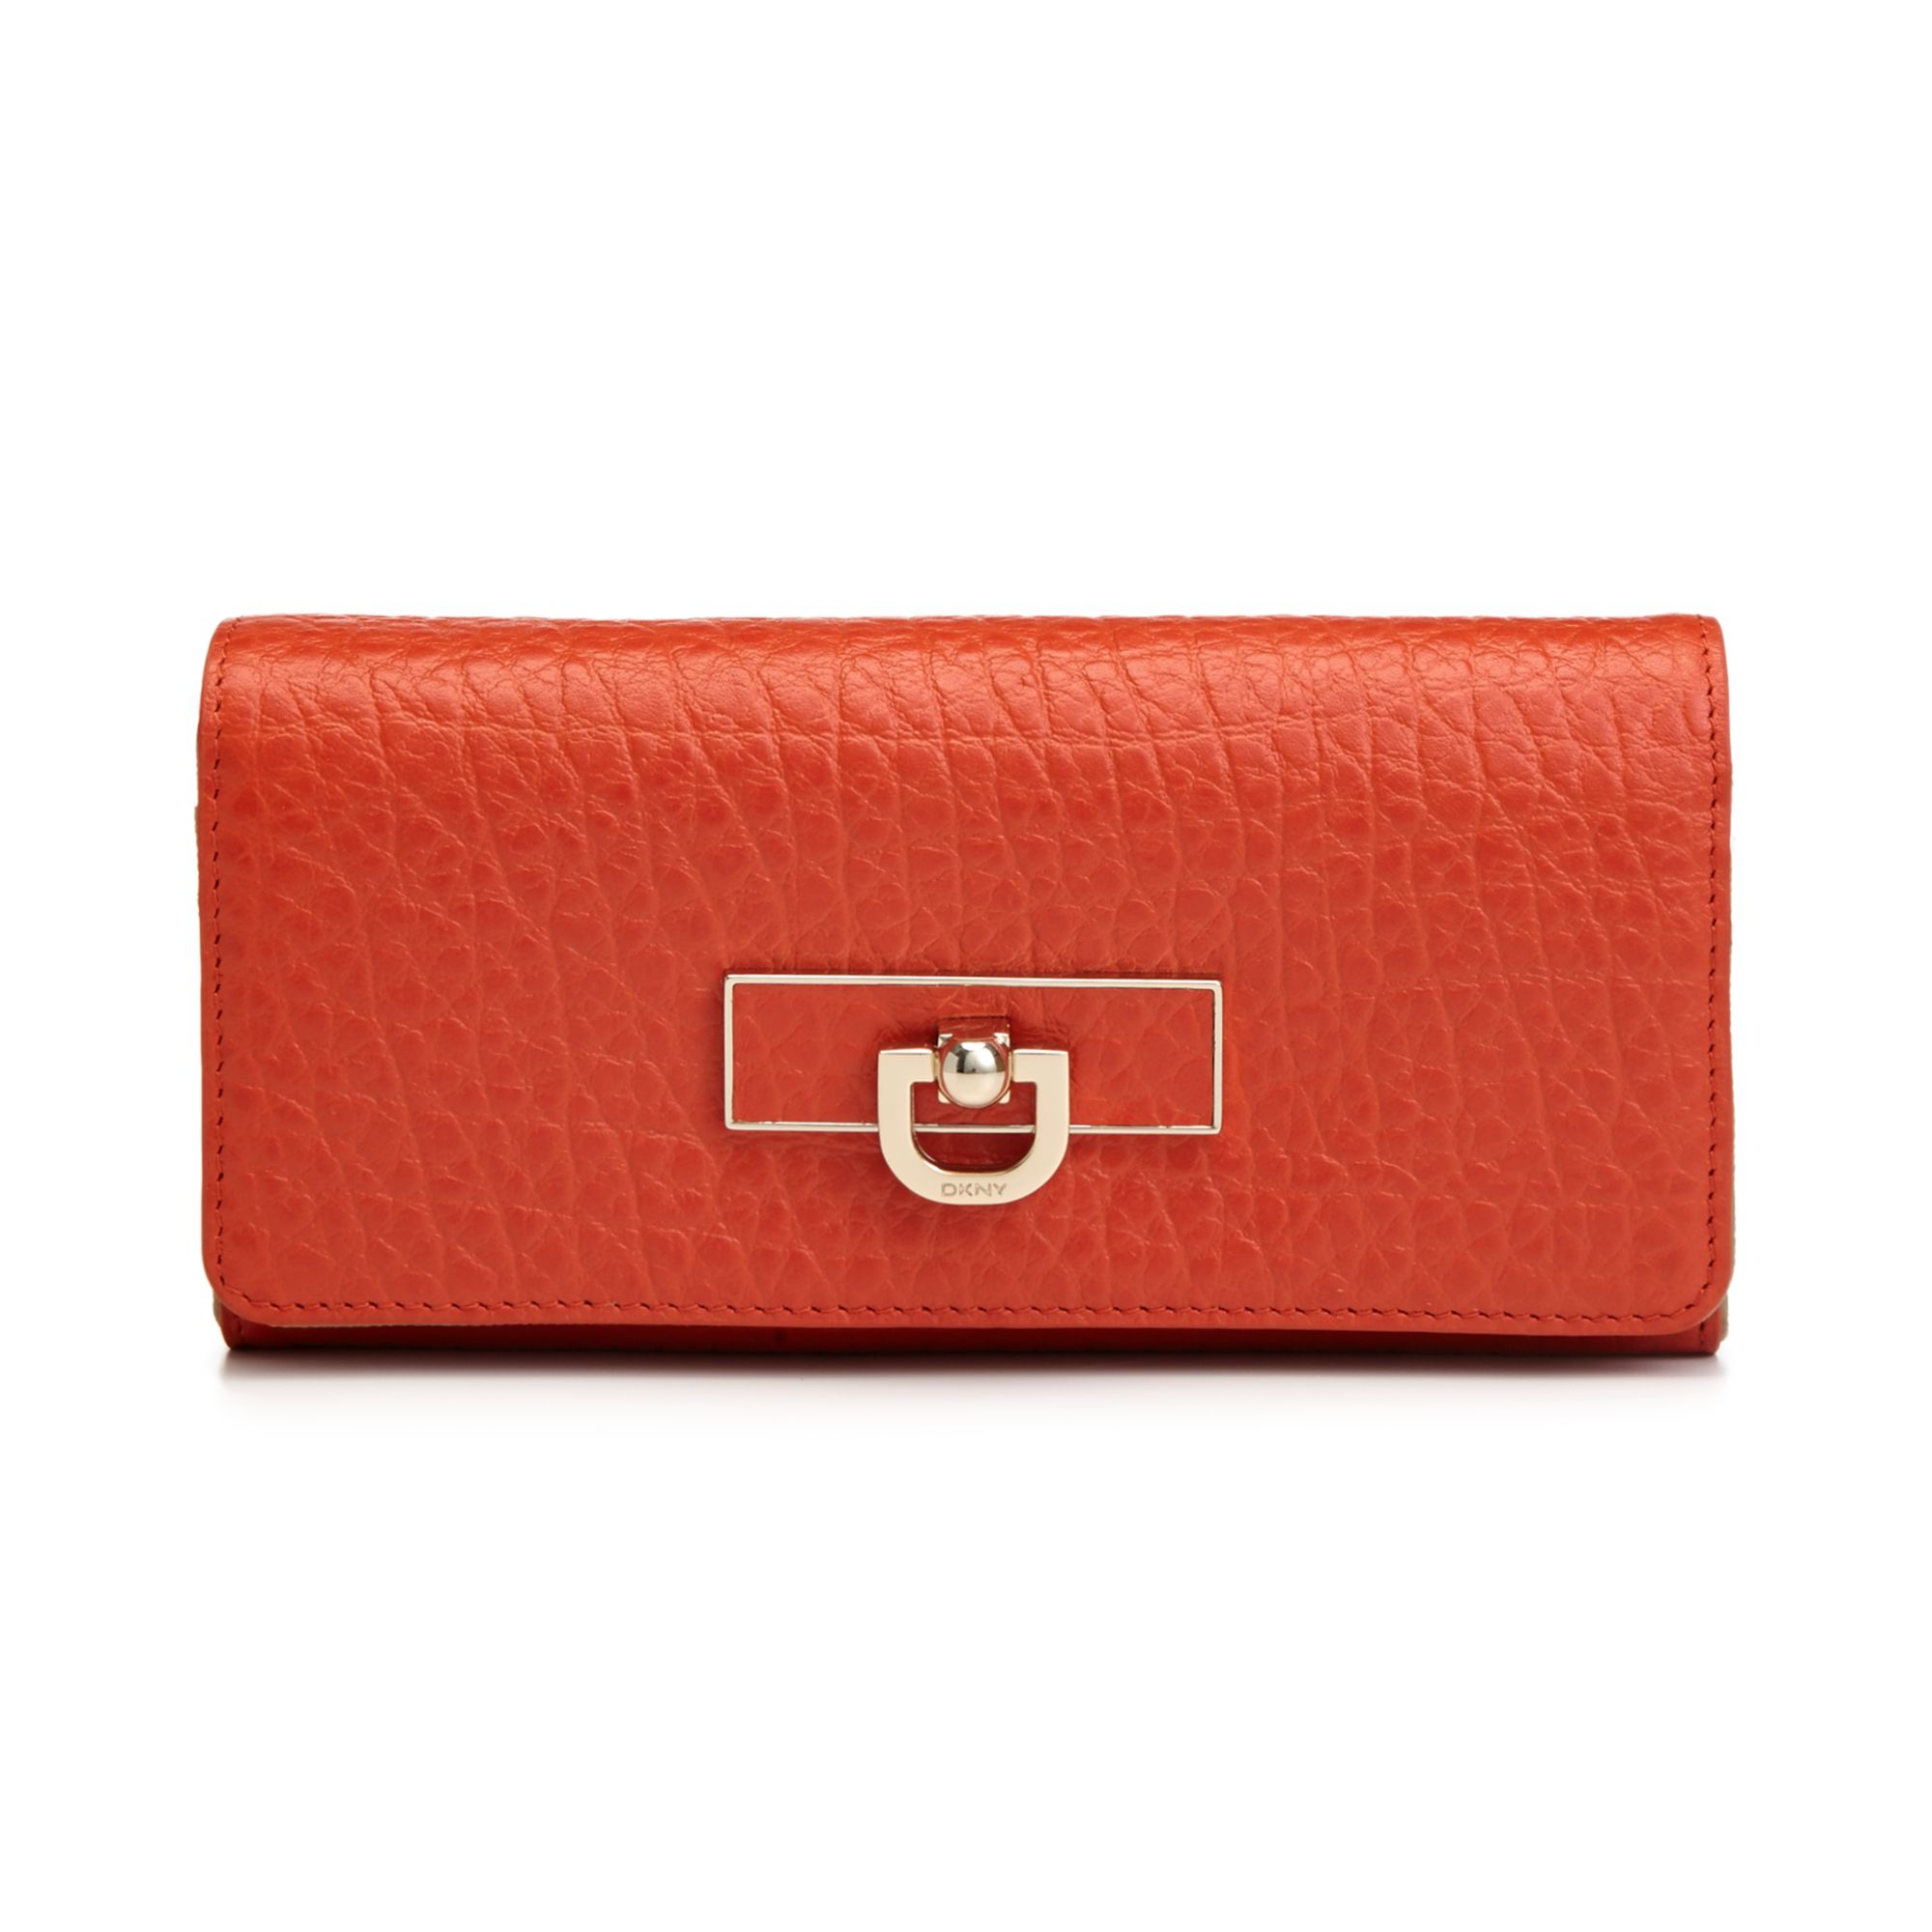 Dkny French Grain Large Carryall Wallet in Orange | Lyst